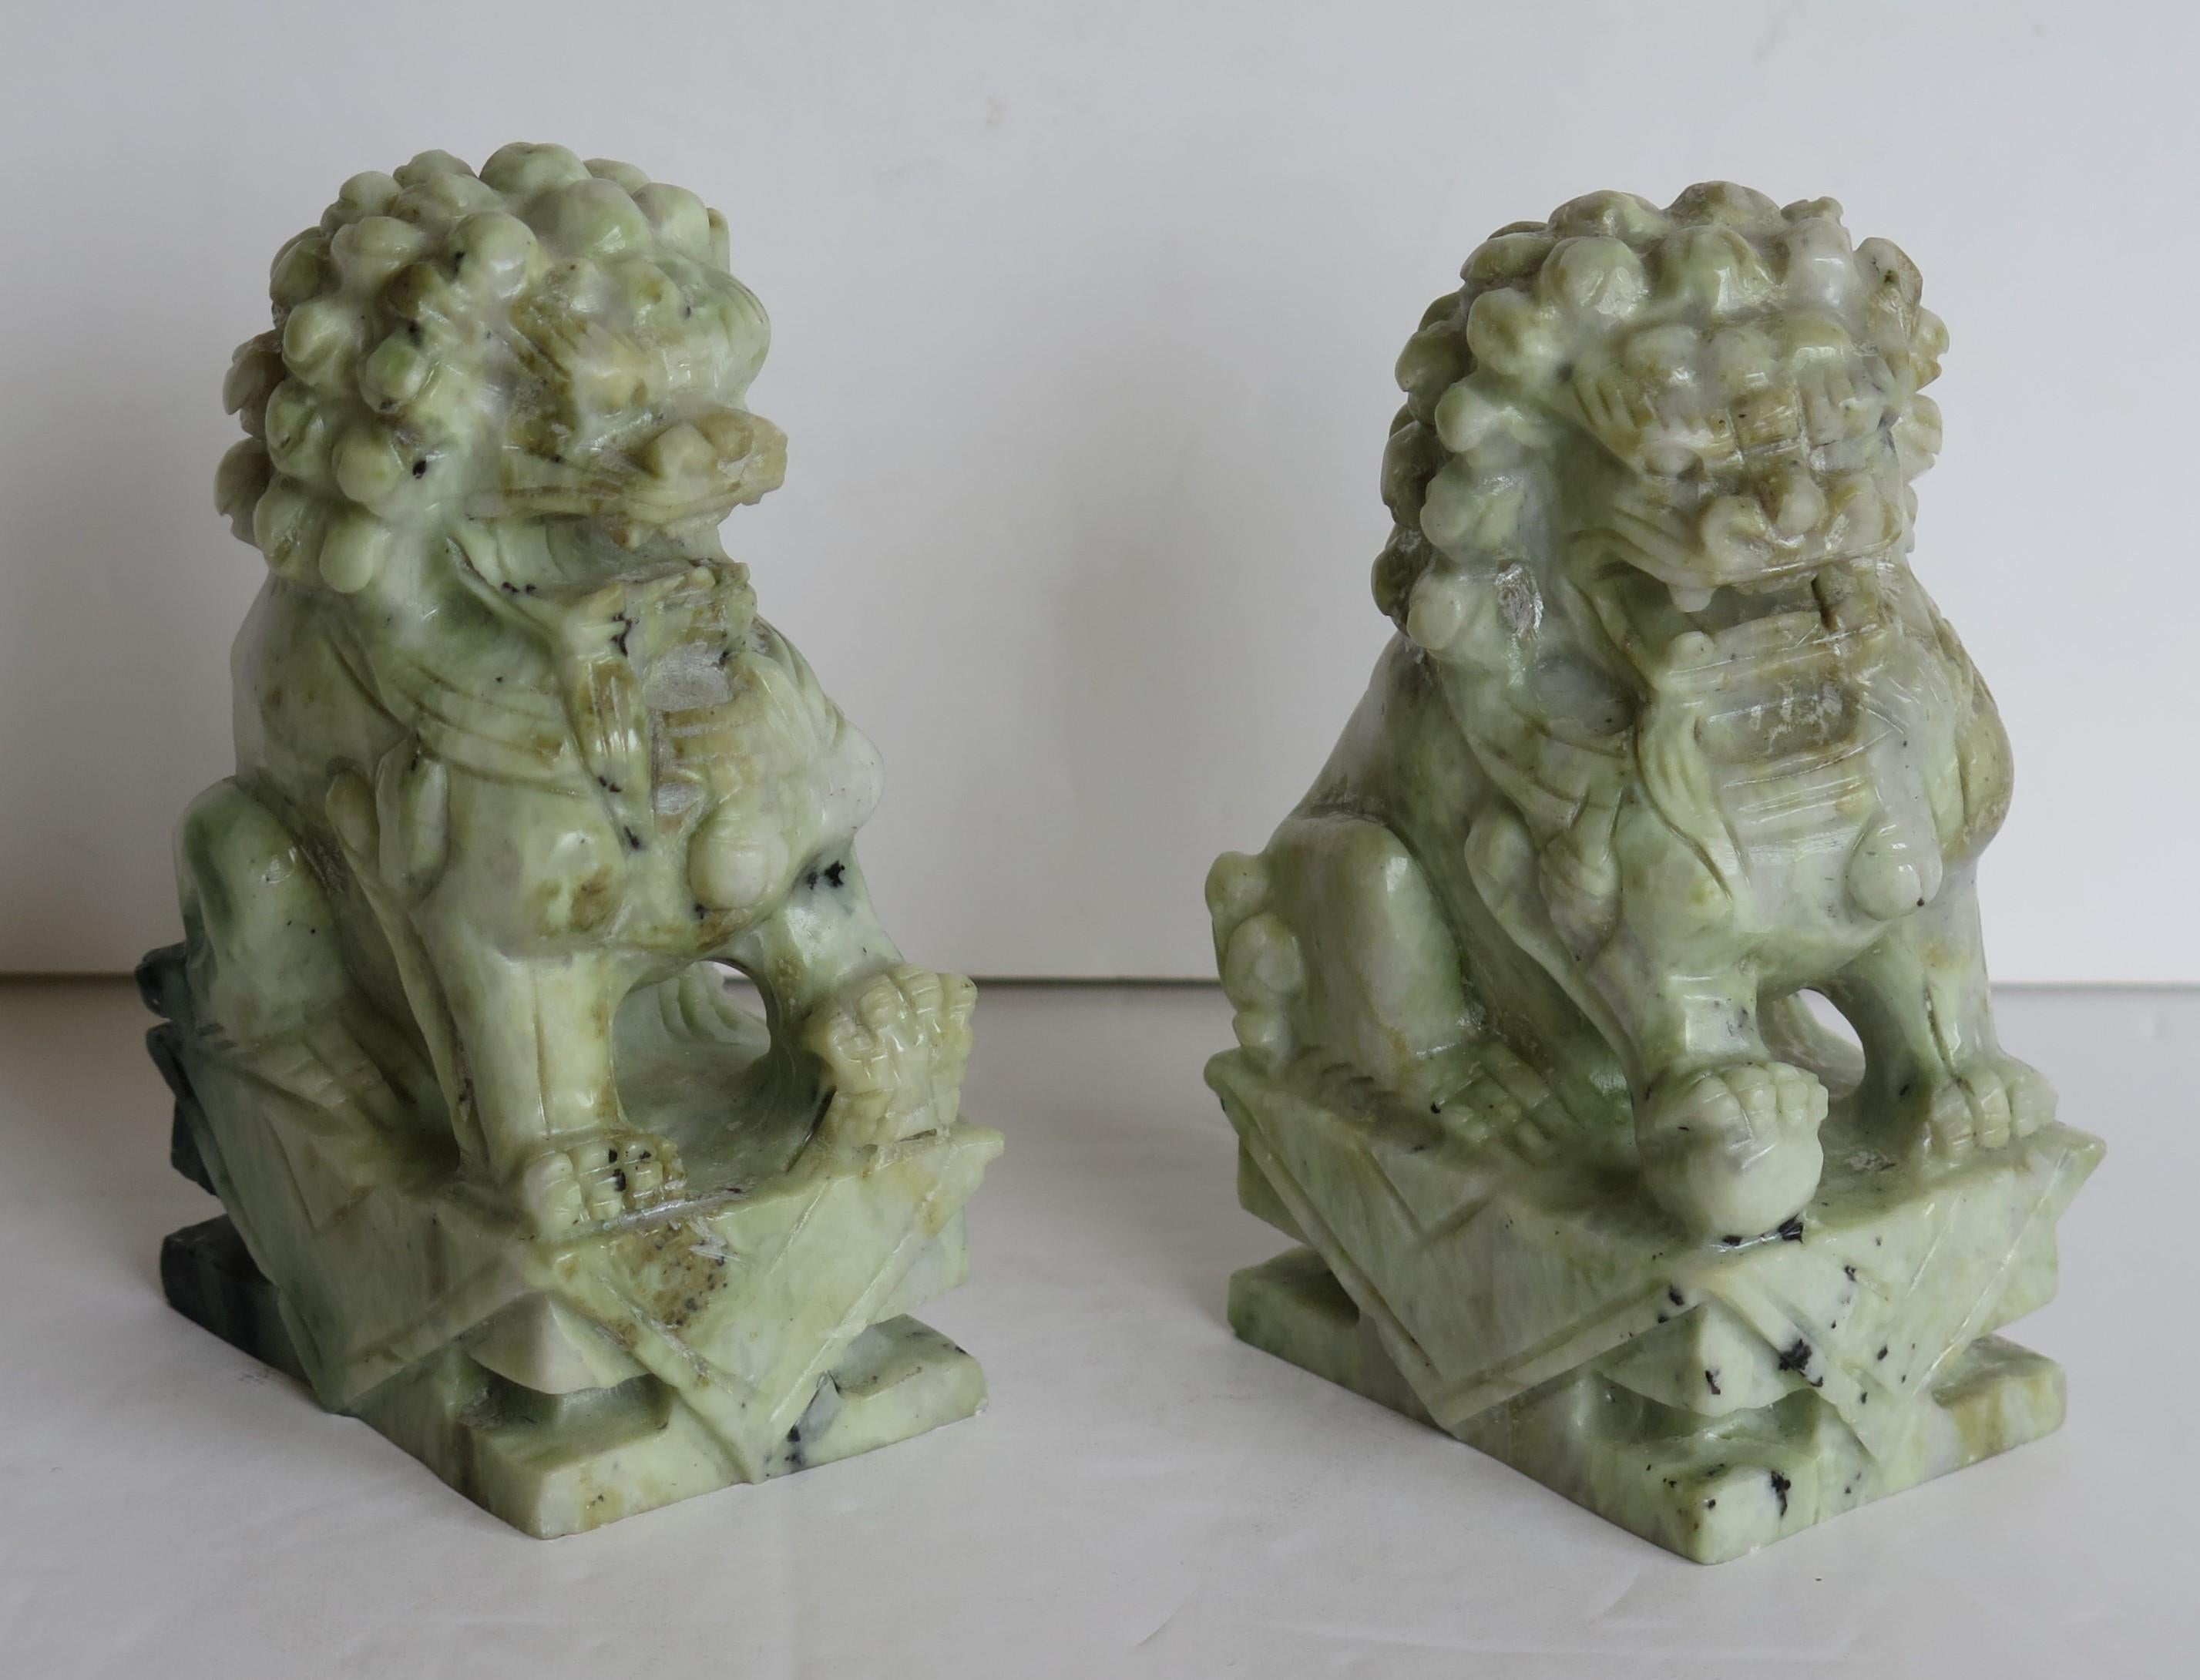 These are a very good pair of antique Chinese foo or lion dogs, sometimes called temple lions made of a hardstone, hand carved with fine detail and polished, dating to the mid 20th century, Circa 1940 or possibly earlier.

Both pieces are hand